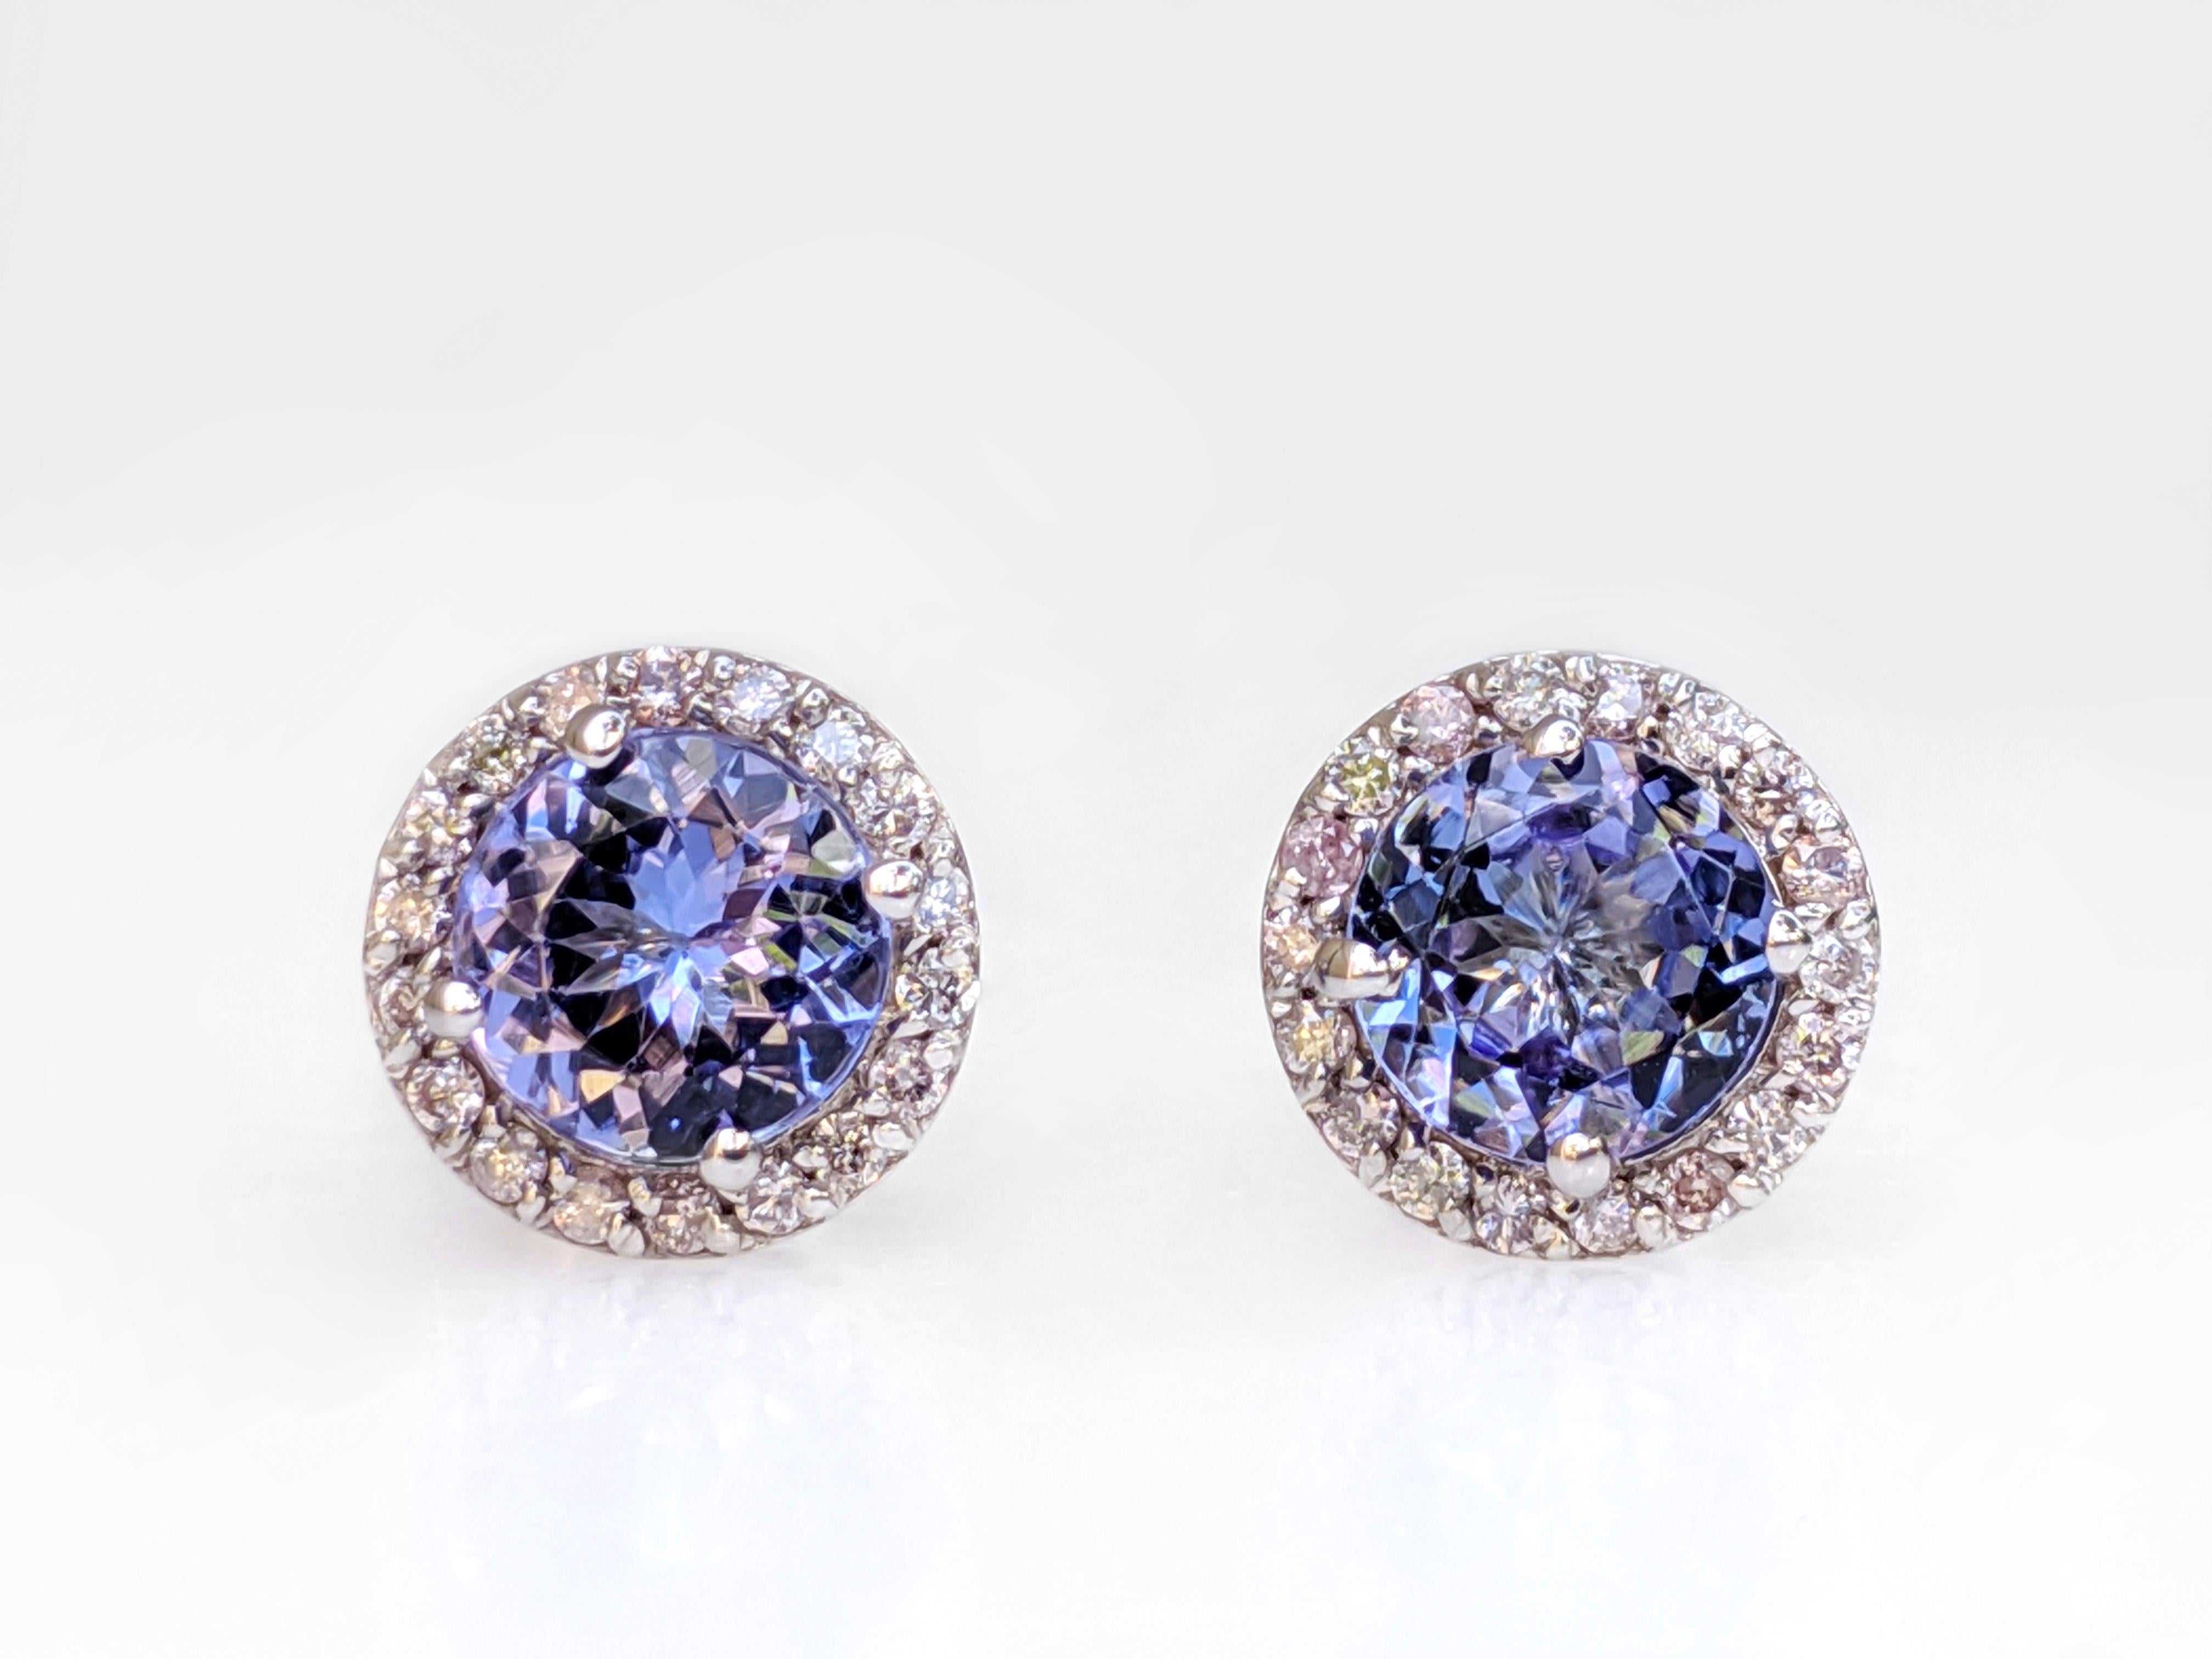 Round Cut $1 NO RESERVE!  1.70cttw Tanzanite & 0.25Ct Diamonds - 14k Yellow Gold Earrings For Sale